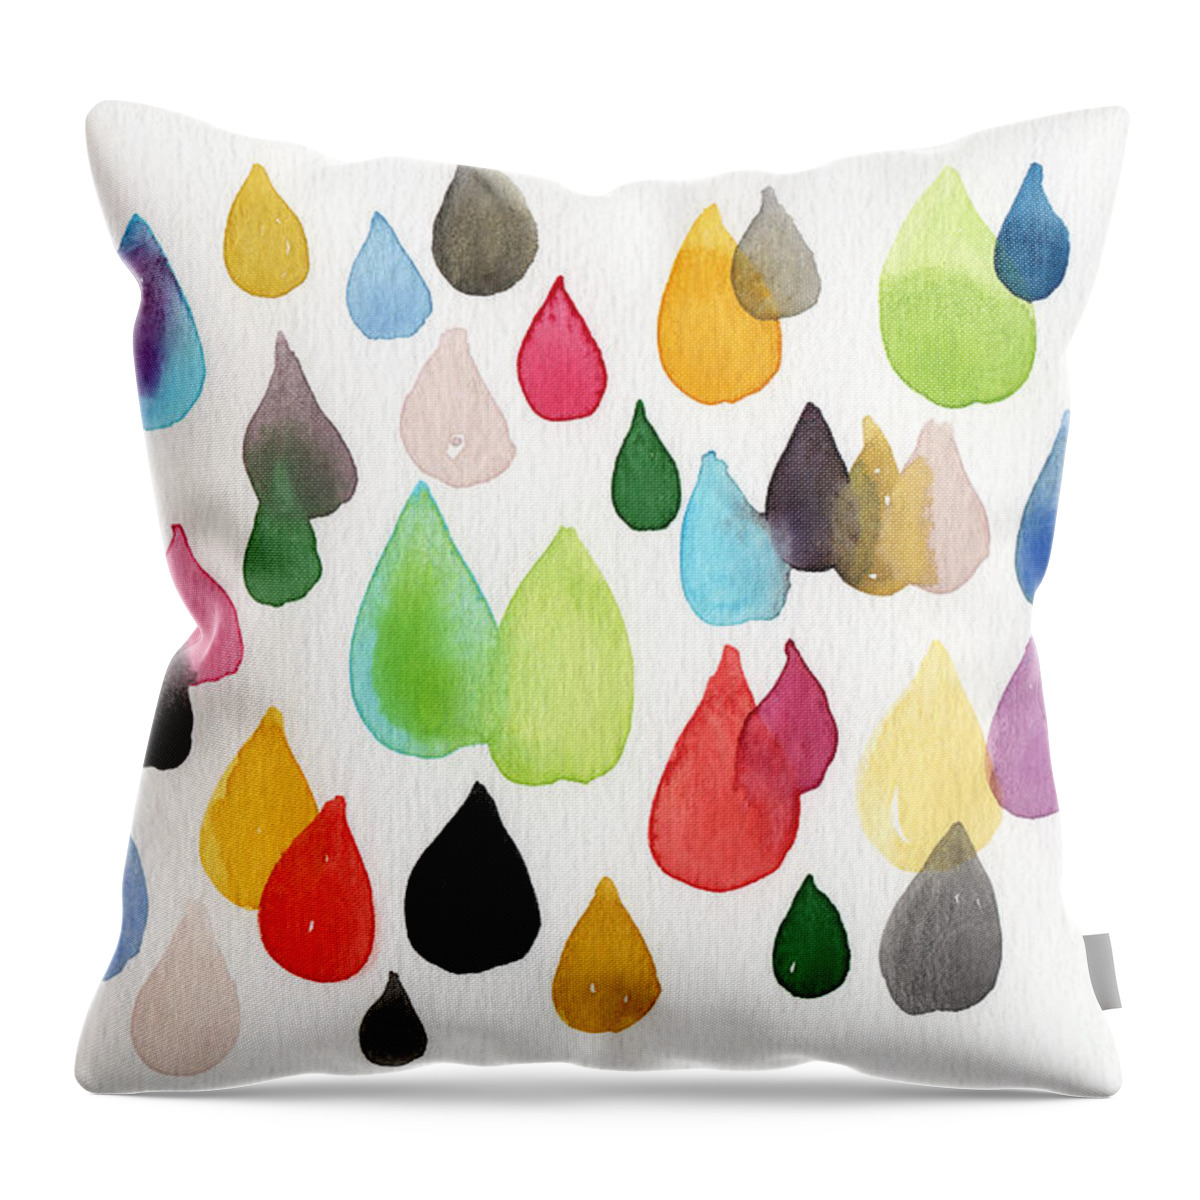 Rainbow Throw Pillow featuring the painting Tears Of An Artist by Linda Woods